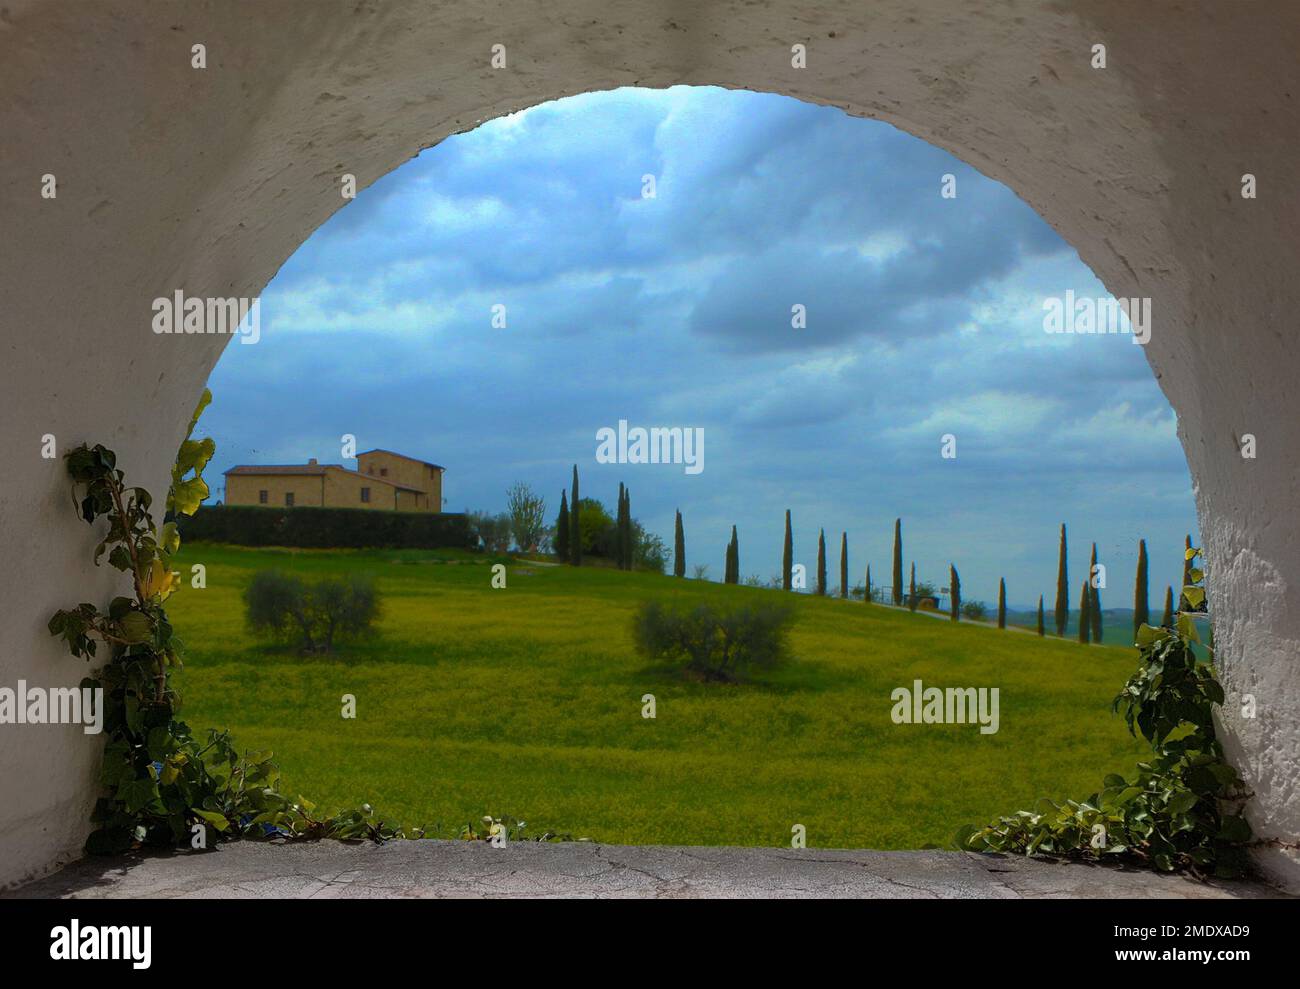 arch of a window overlooking a typical Tuscan hill with a leaden sky and cypresses Stock Photo